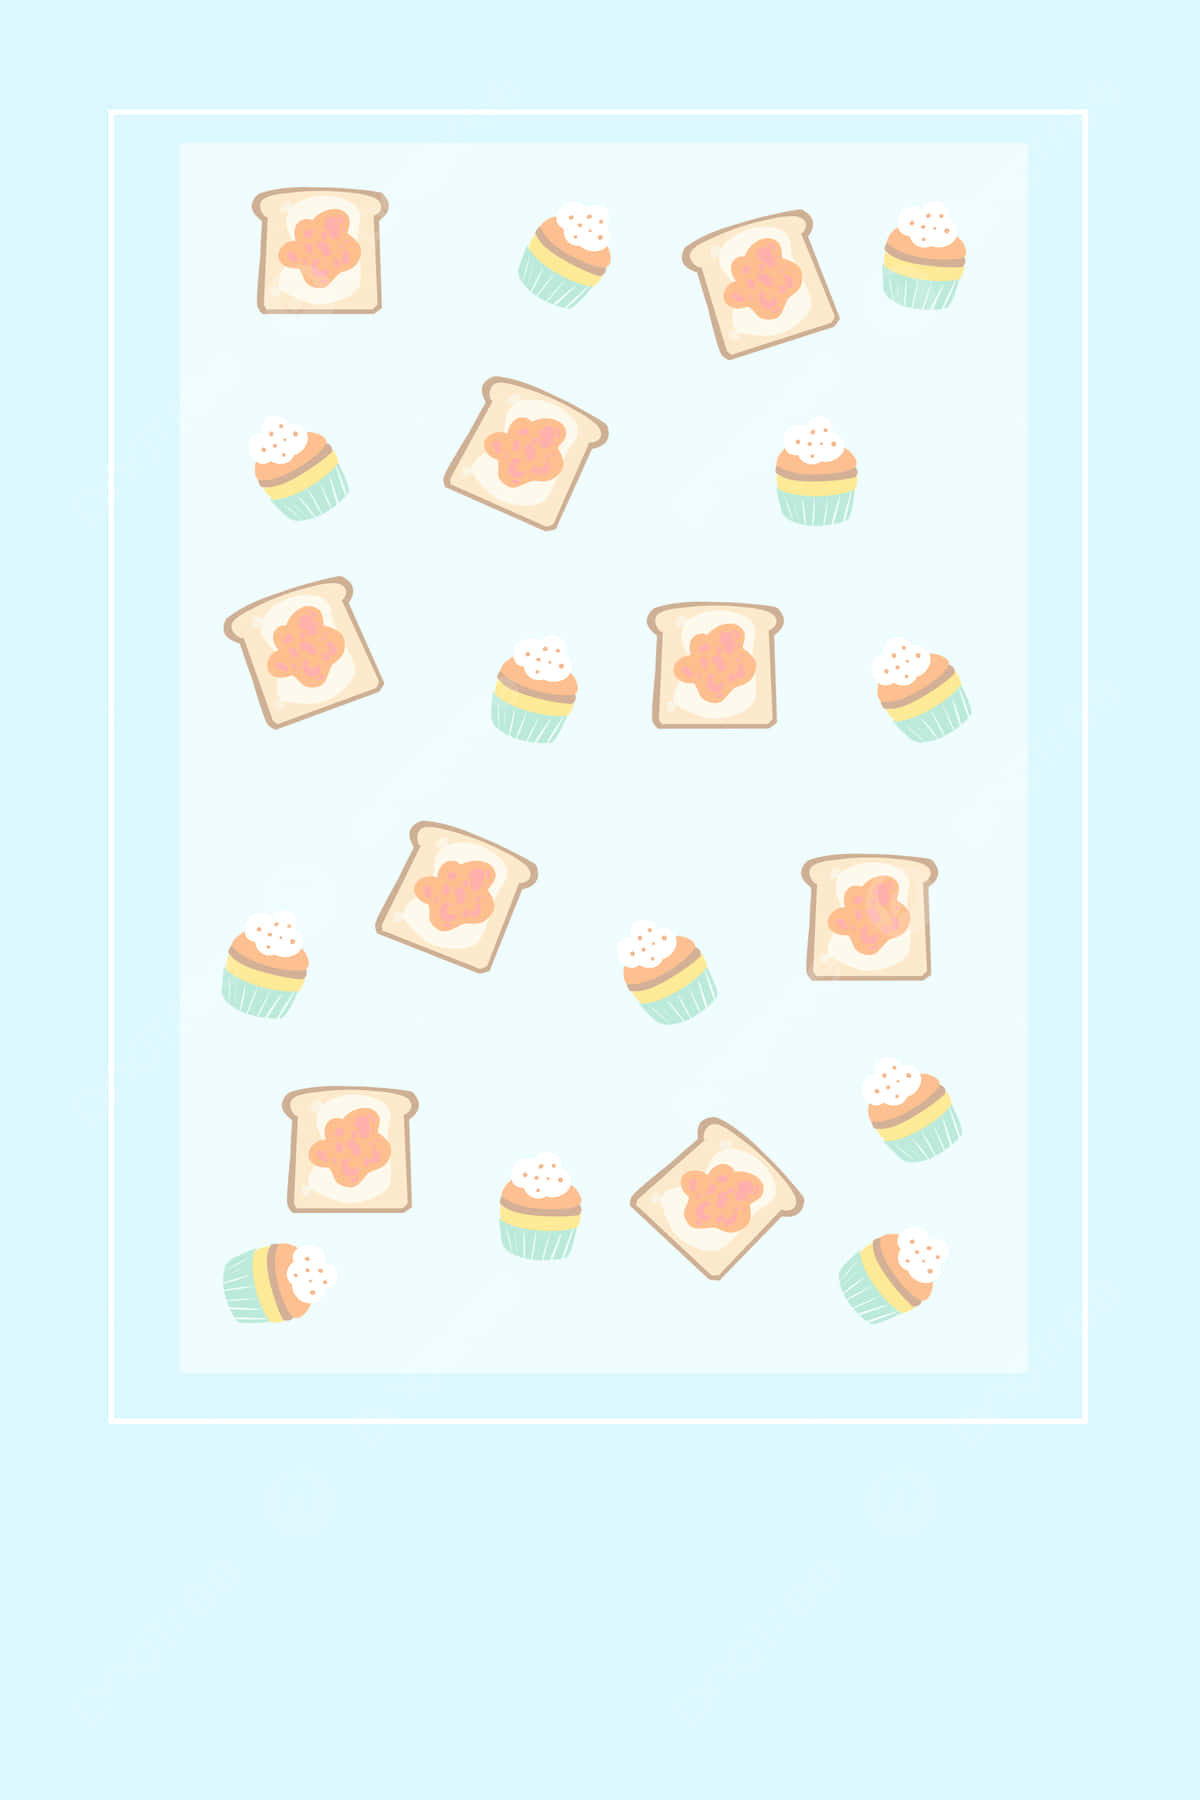 Generous Numbers Of Breads And Cupcakes Wallpaper